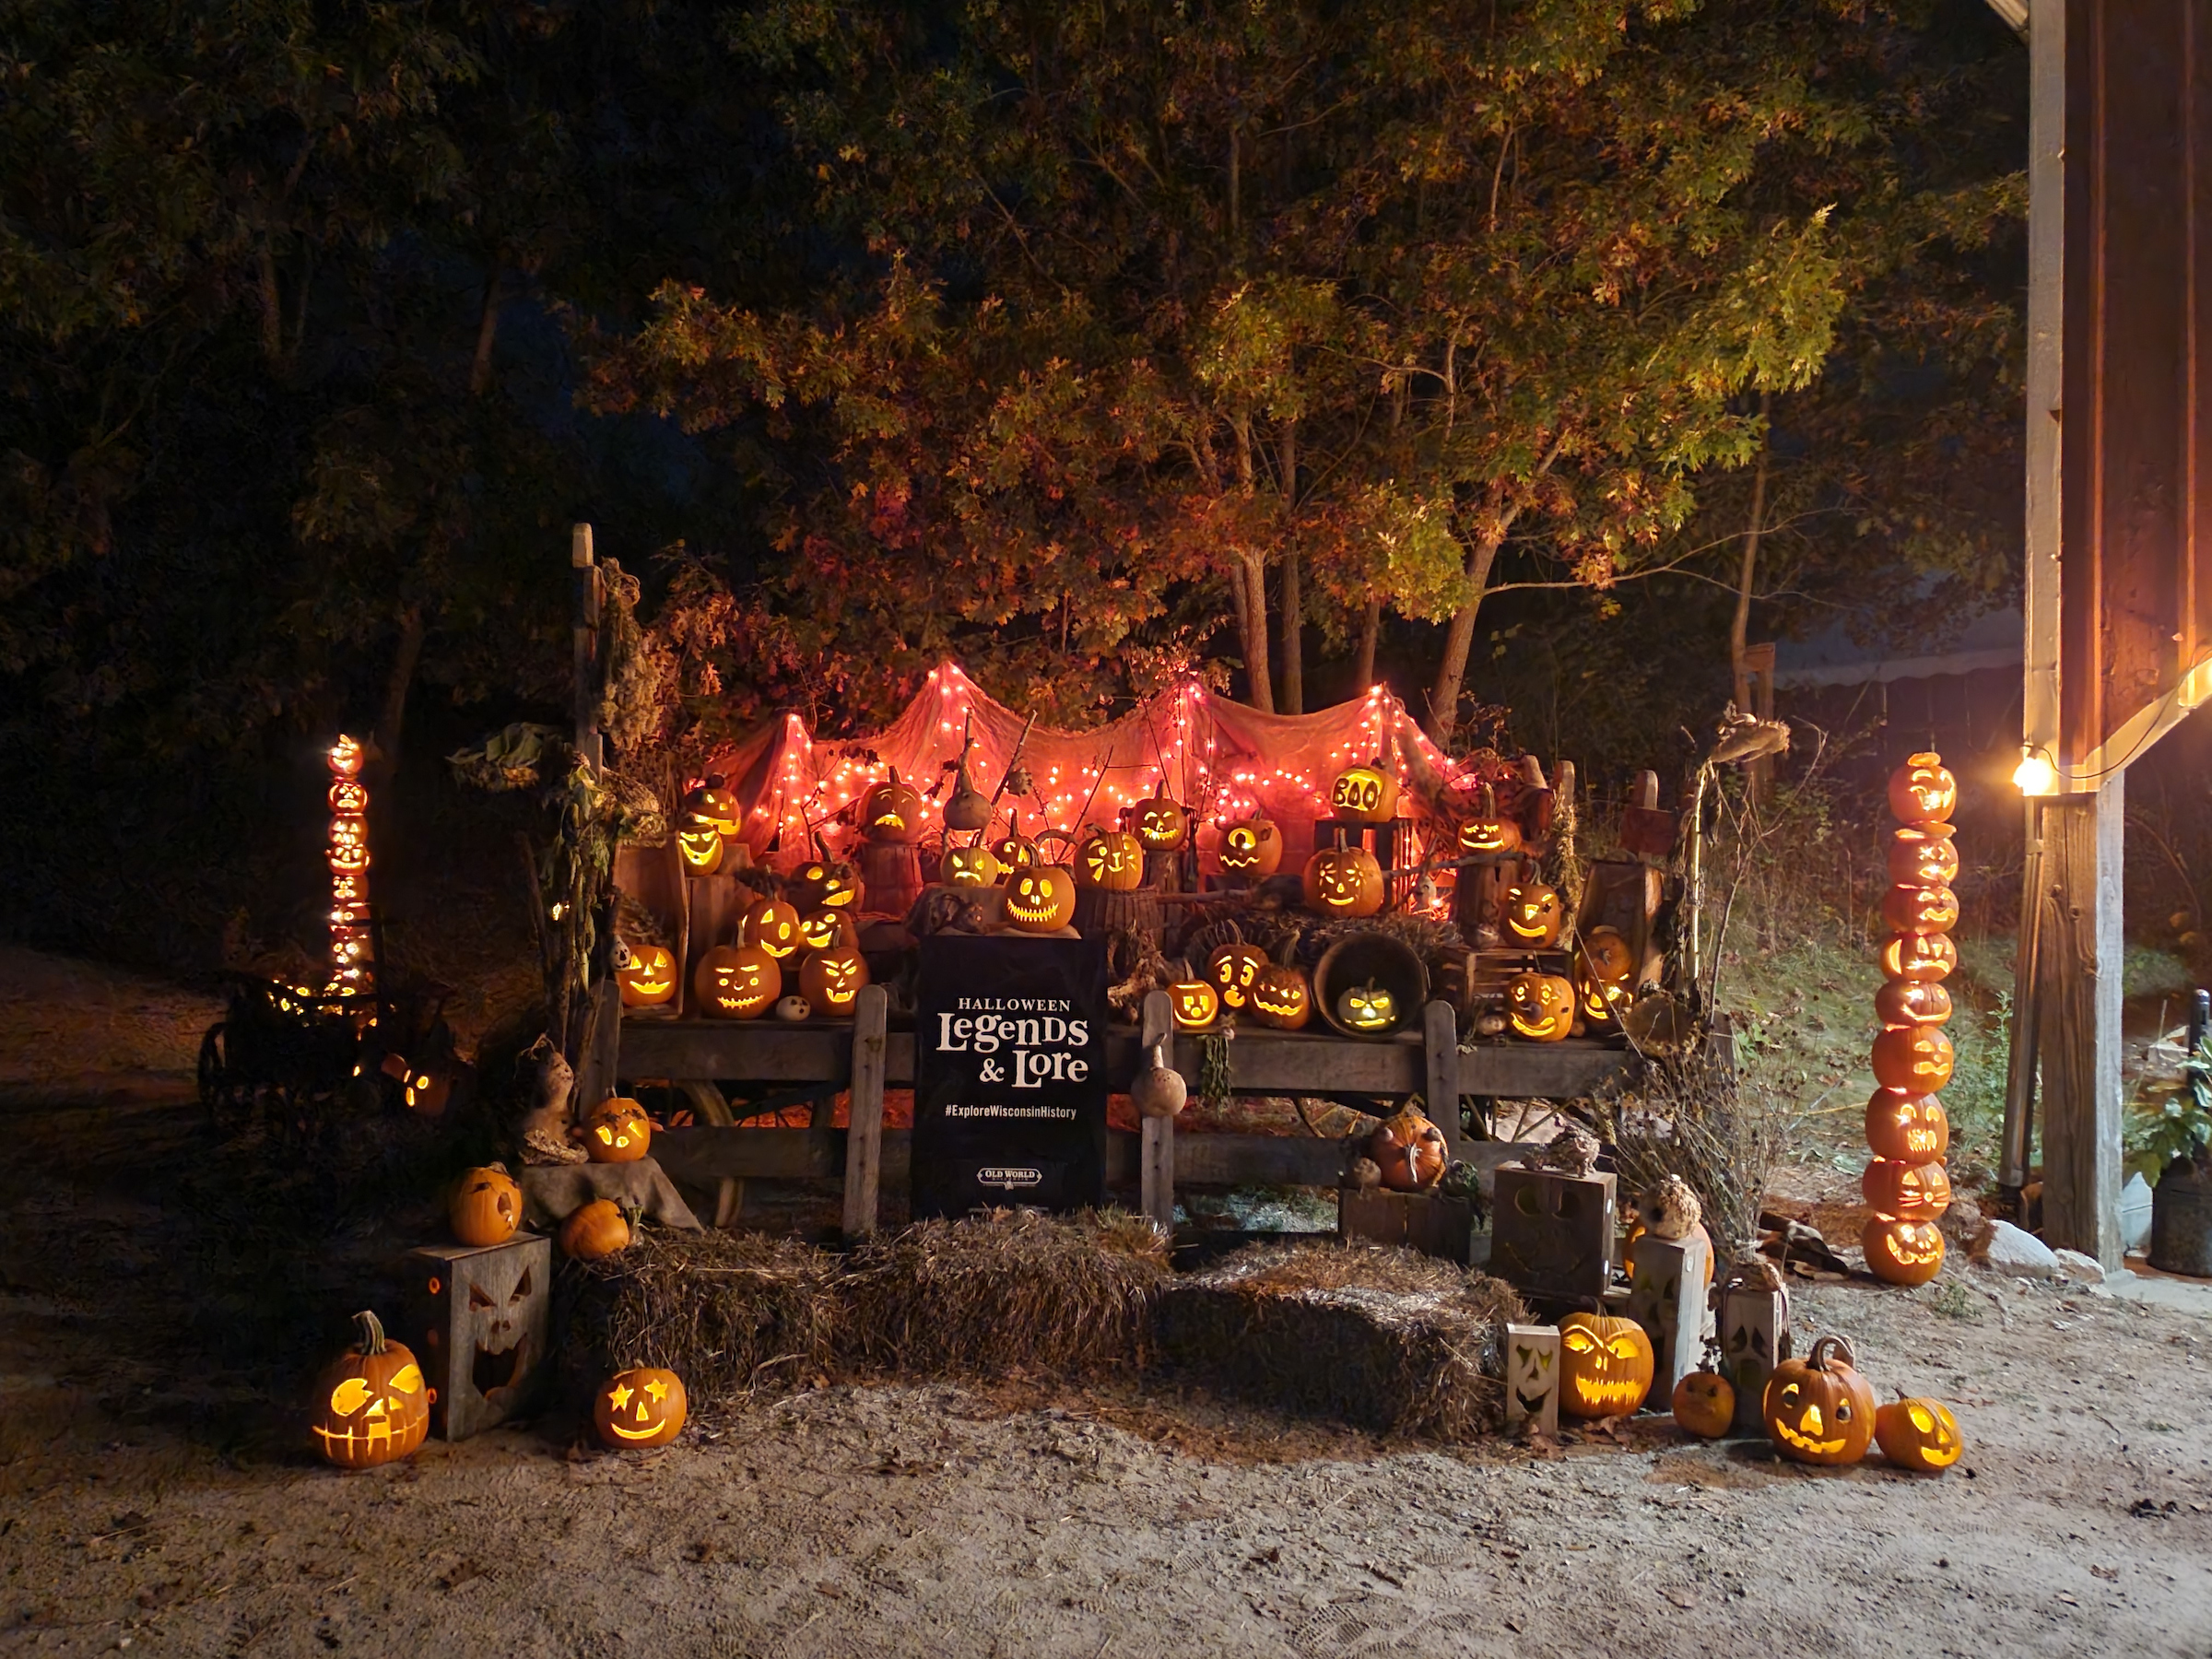 Jack o' lanterns set up on wooden pallets with a sign reading "Halloween Legends & Lore"